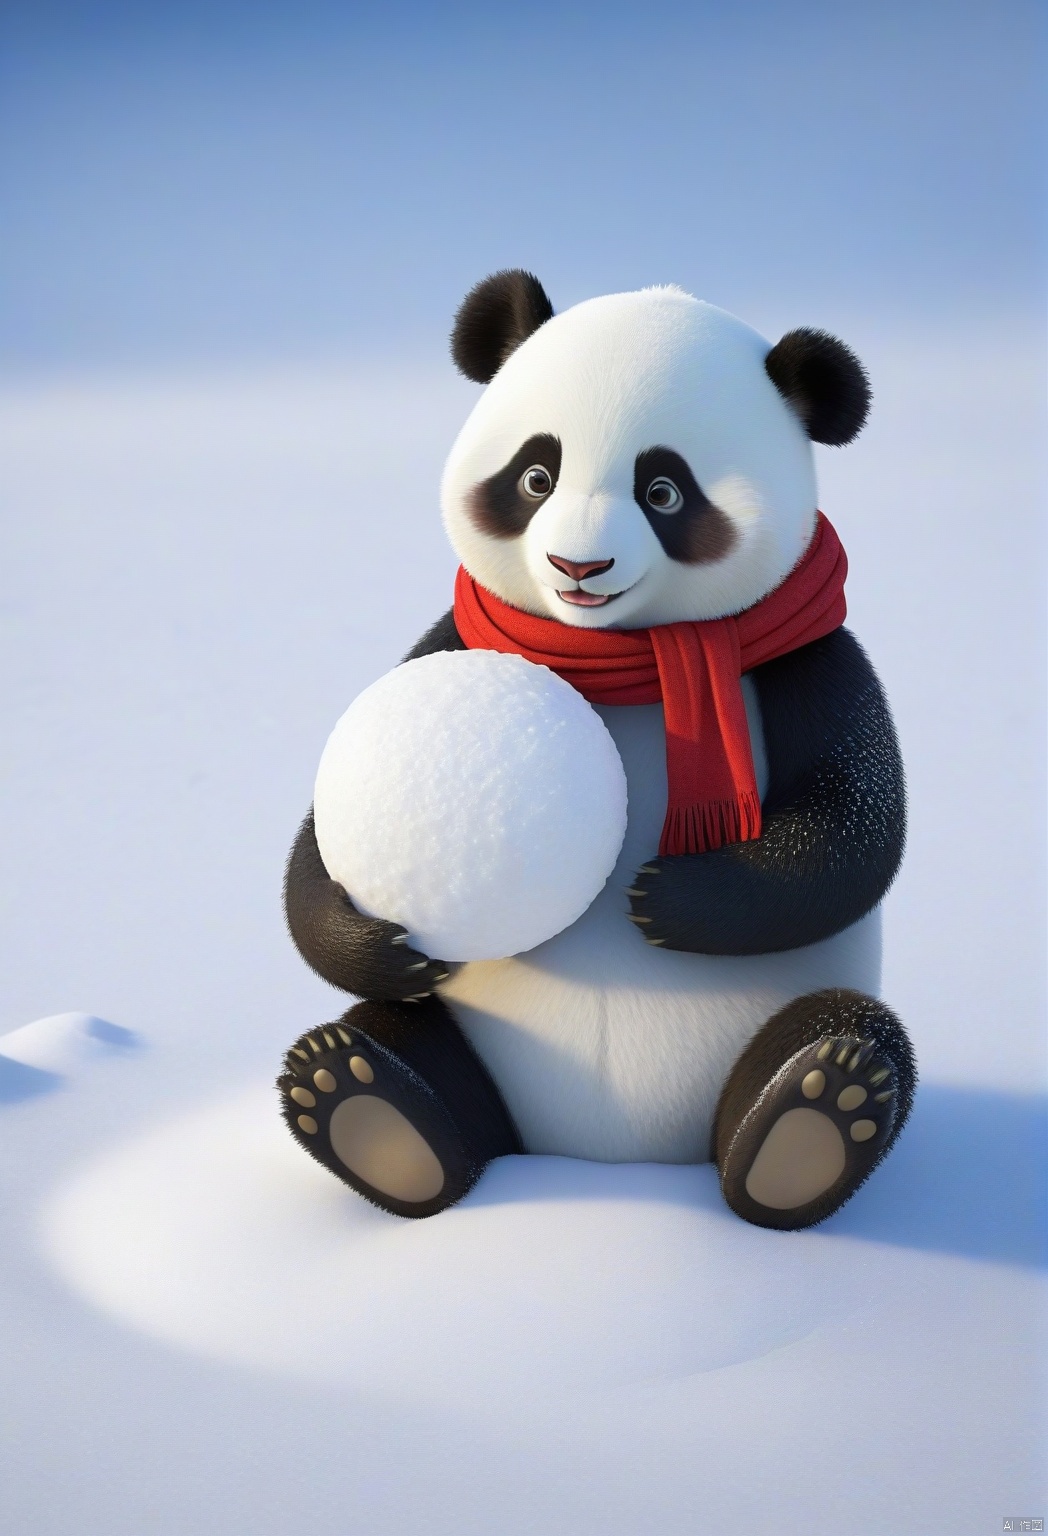  A cute cartoon panda sits in the snow, wearing a red scarf and holding a big snowball, ready to have a snowball fight with friends.